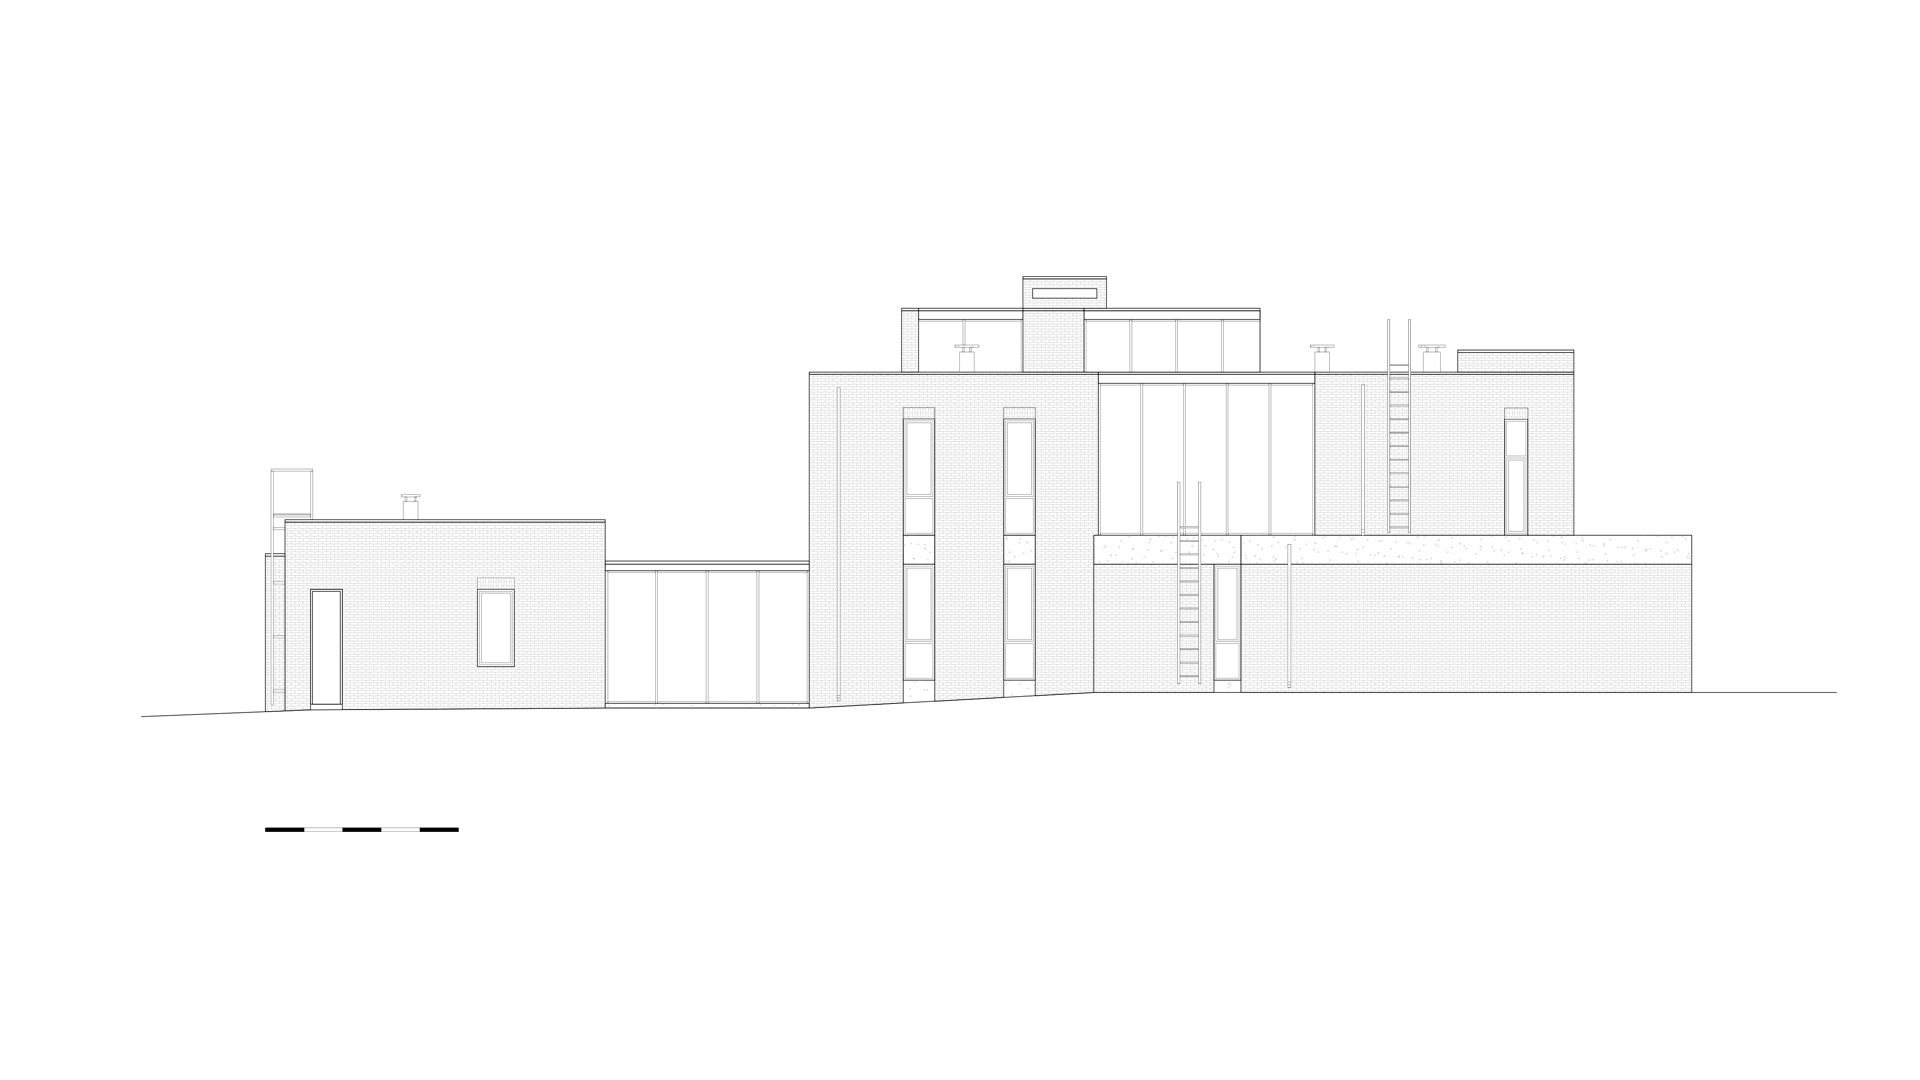 the layout of the building